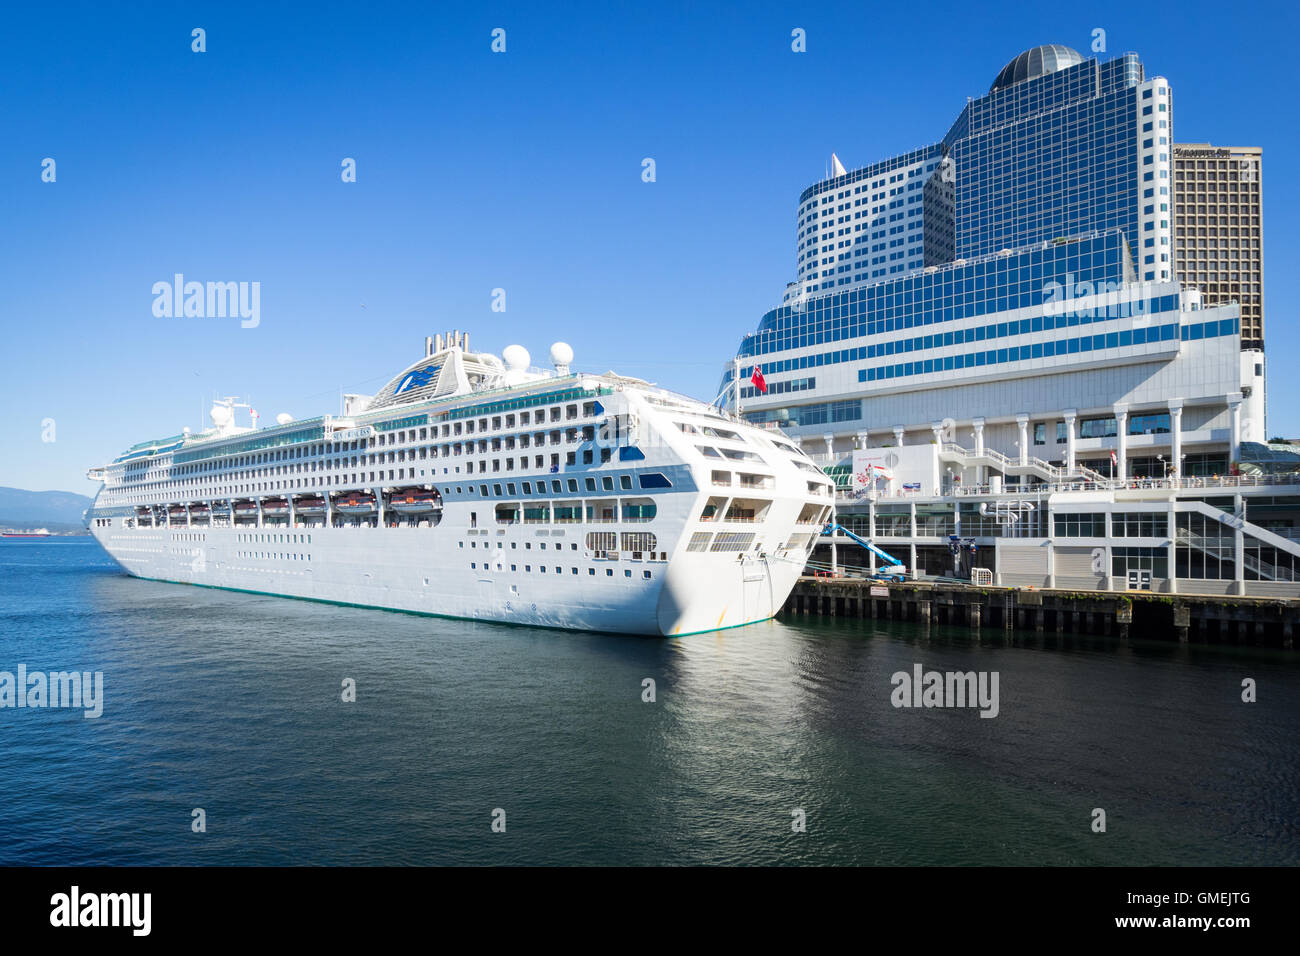 The Sun Princess cruise ship docked at Canada Place.  Pan Pacific Hotel in background. Vancouver, Canada. Stock Photo